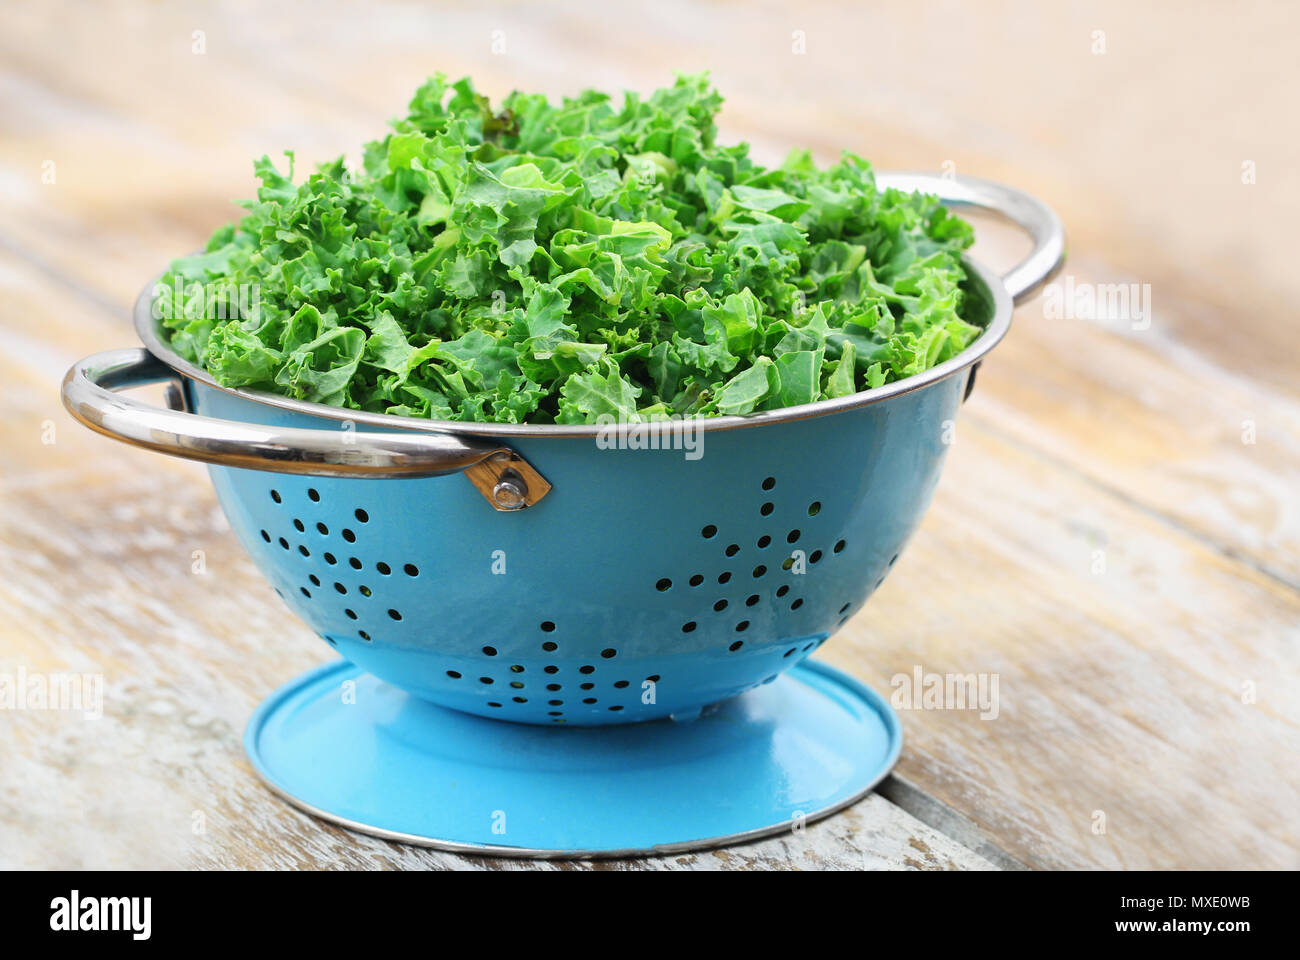 Blue colander with raw shredded kale on rustic wooden surface Stock Photo